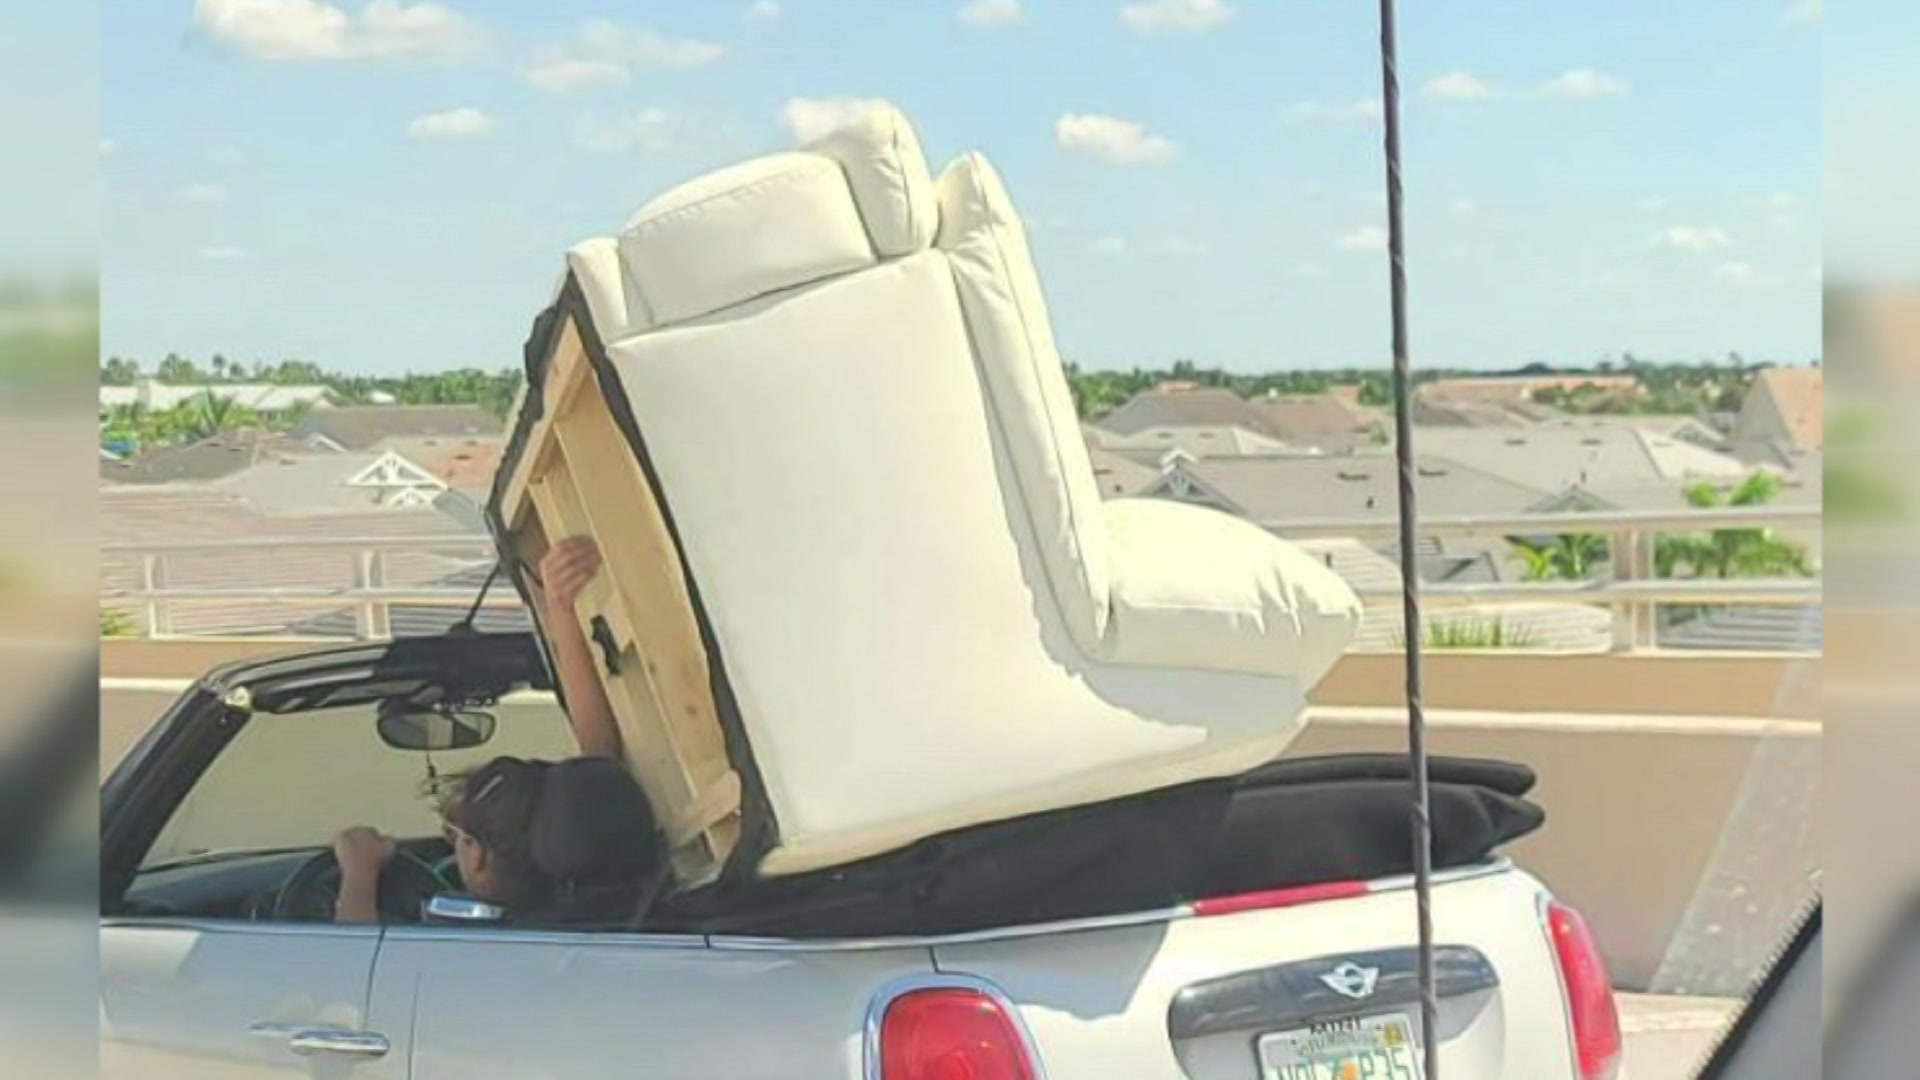 SEE IT: Woman Hauls Couch On Convertible MINI Cooper, Holds It Up With Hand!